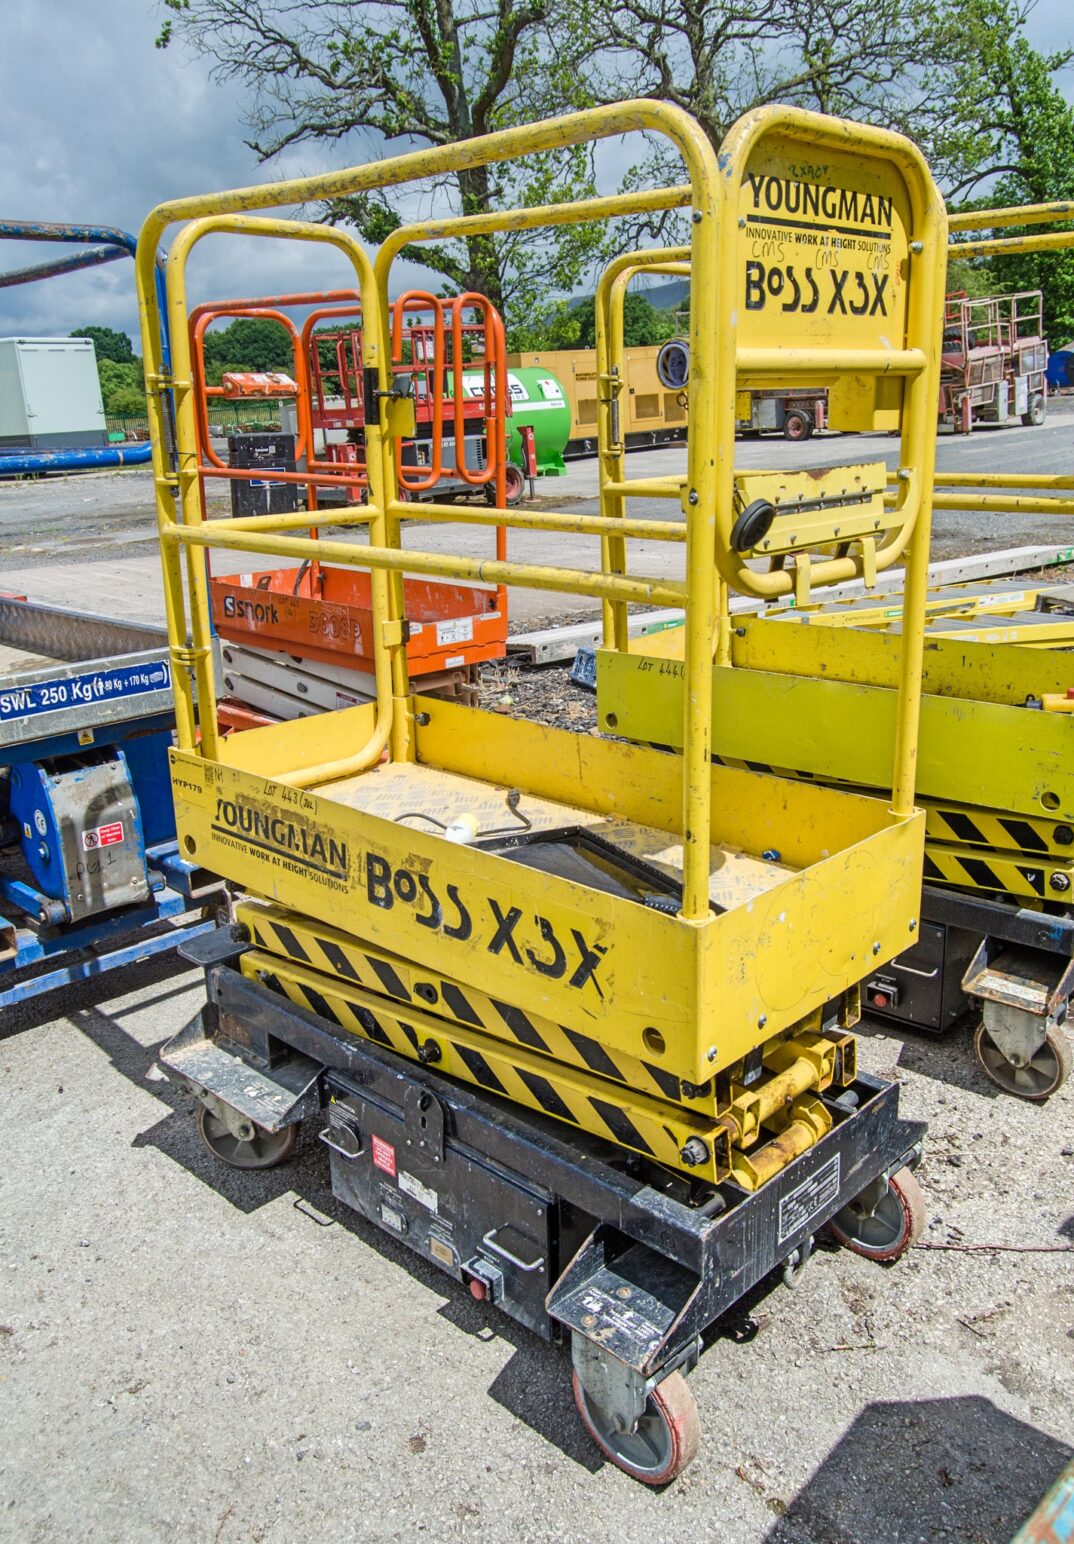 Boss X3X battery electric push around For Auction on: 2024-07-11 For Auction on 2024-07-11